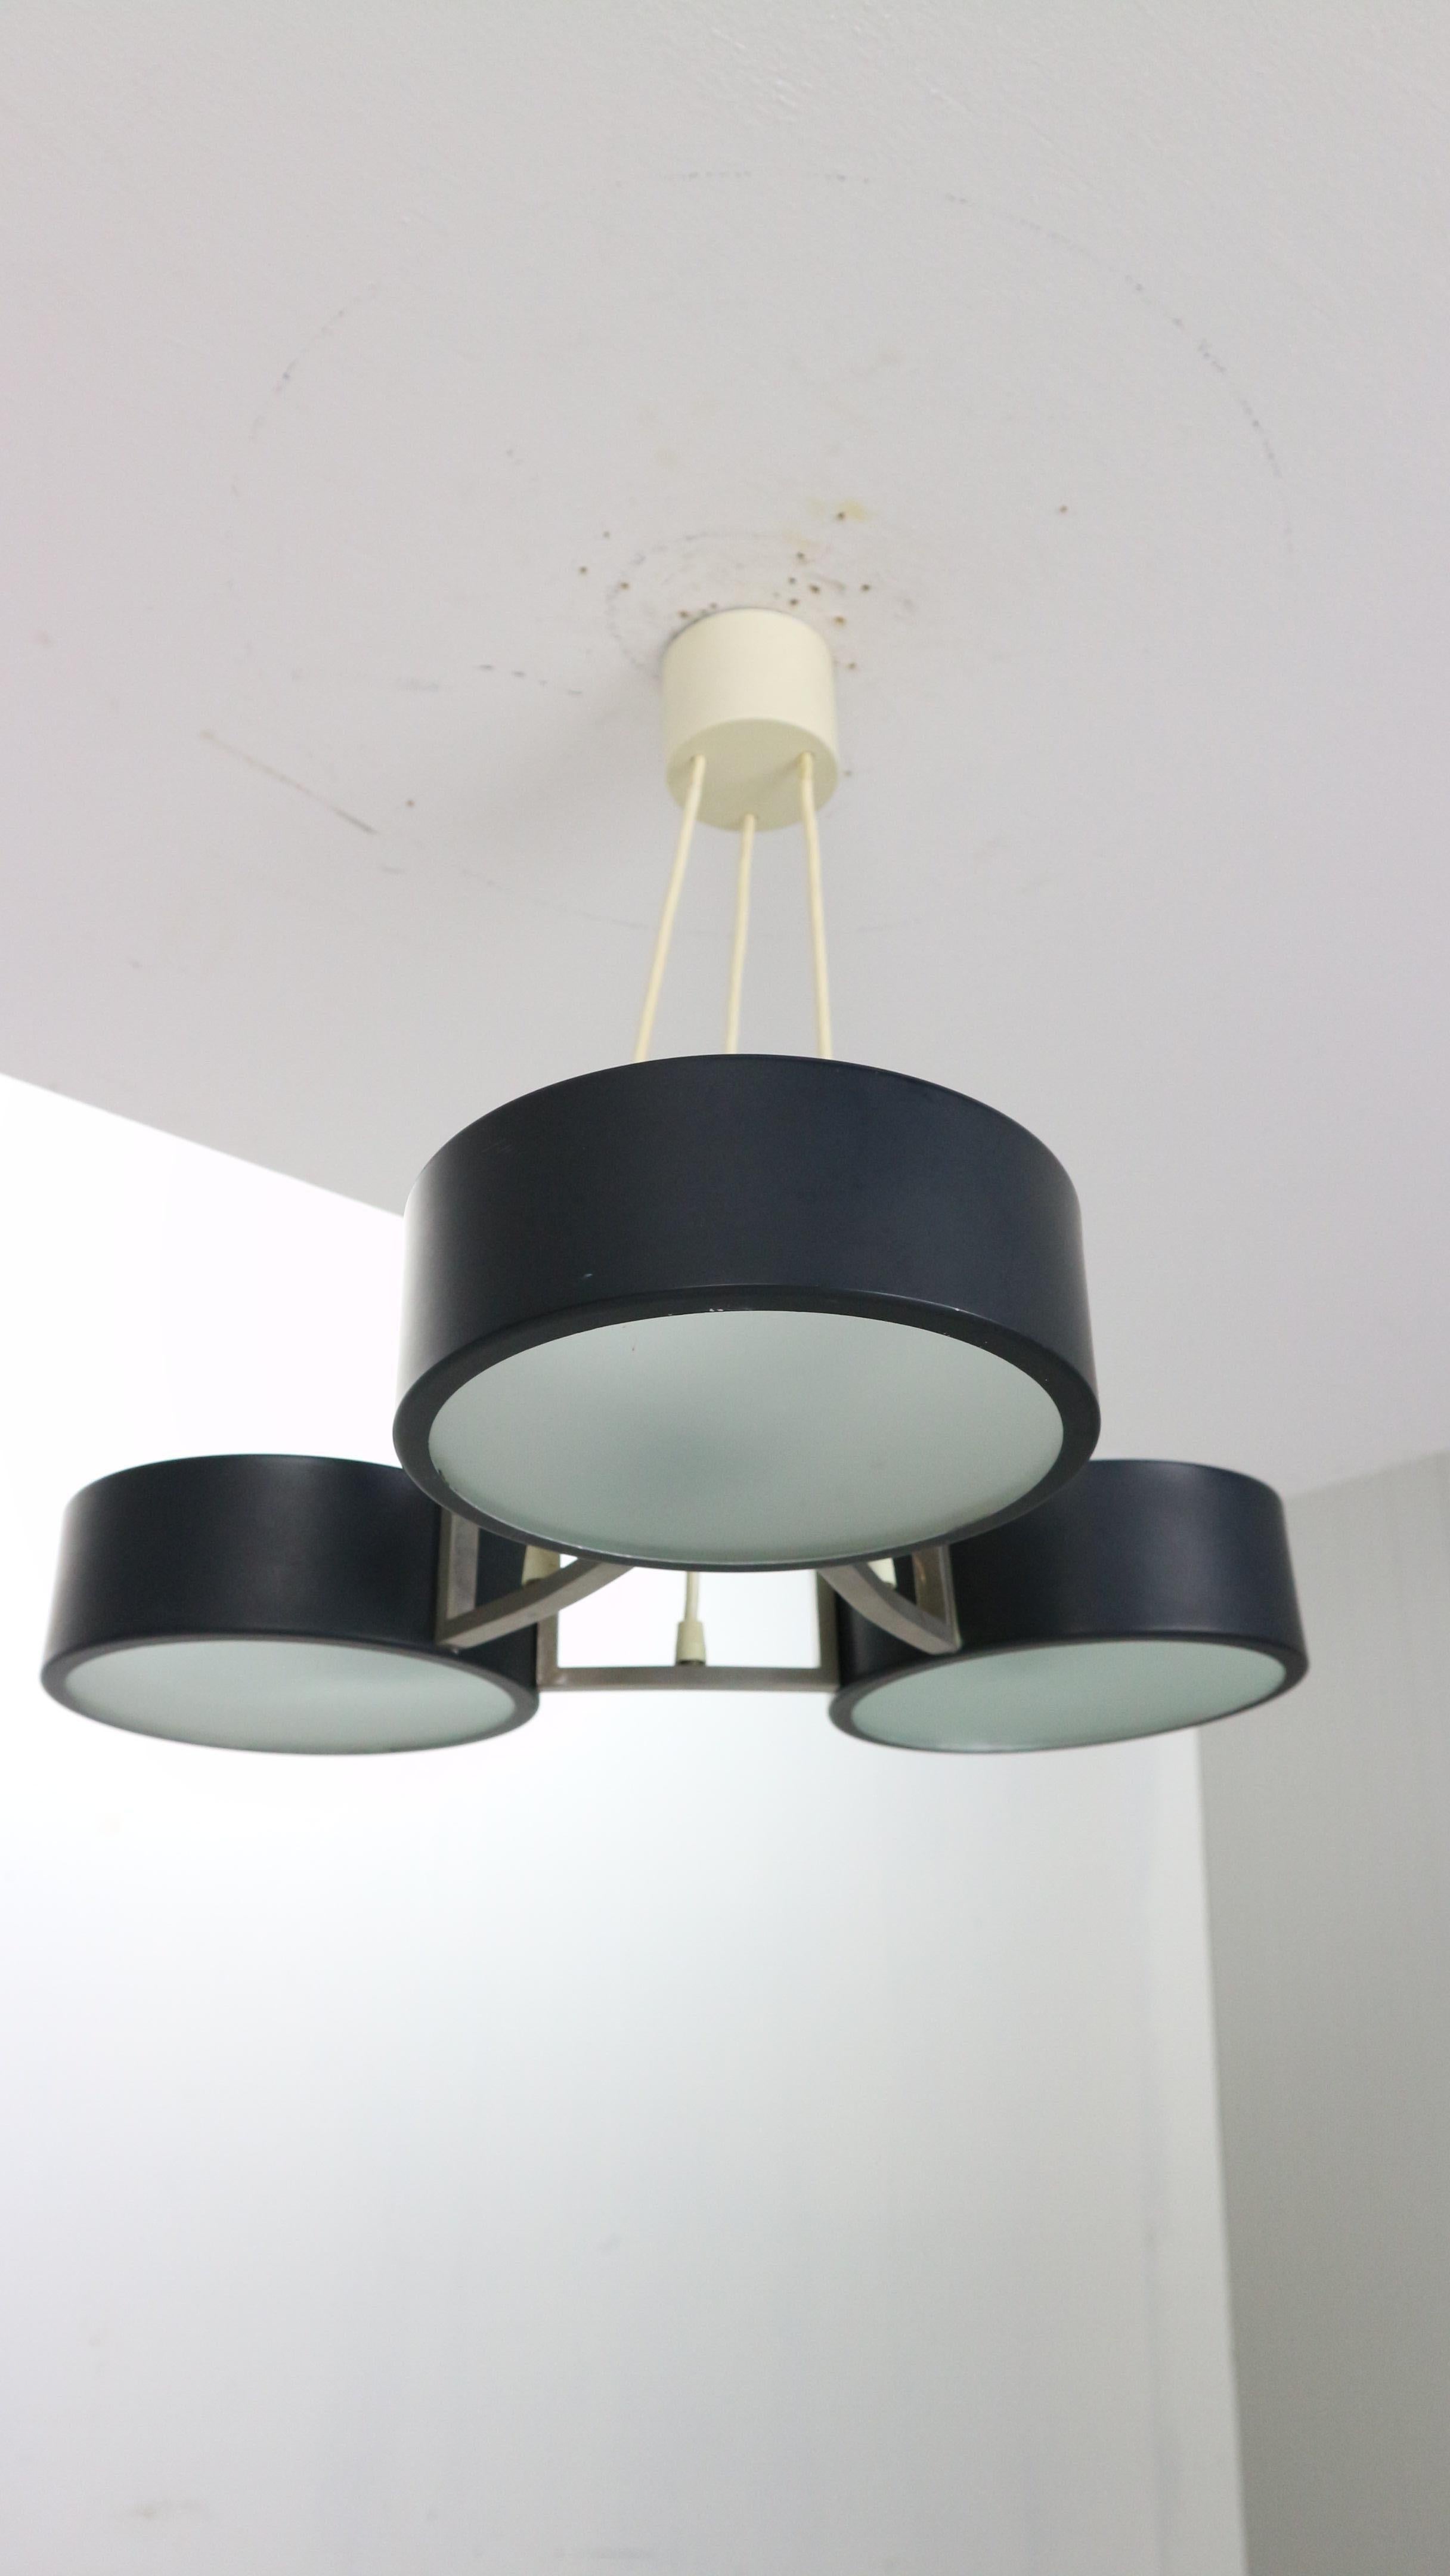 Chandelier/ pendant designed by Bruno Gatta and manufactured for Stilnovo in 1960s period, Italy.
This lamp has three black lacquered metal shades with milk glass opaline glass diffuser shades, which is held by elegant nickel fixture.
Lamp has